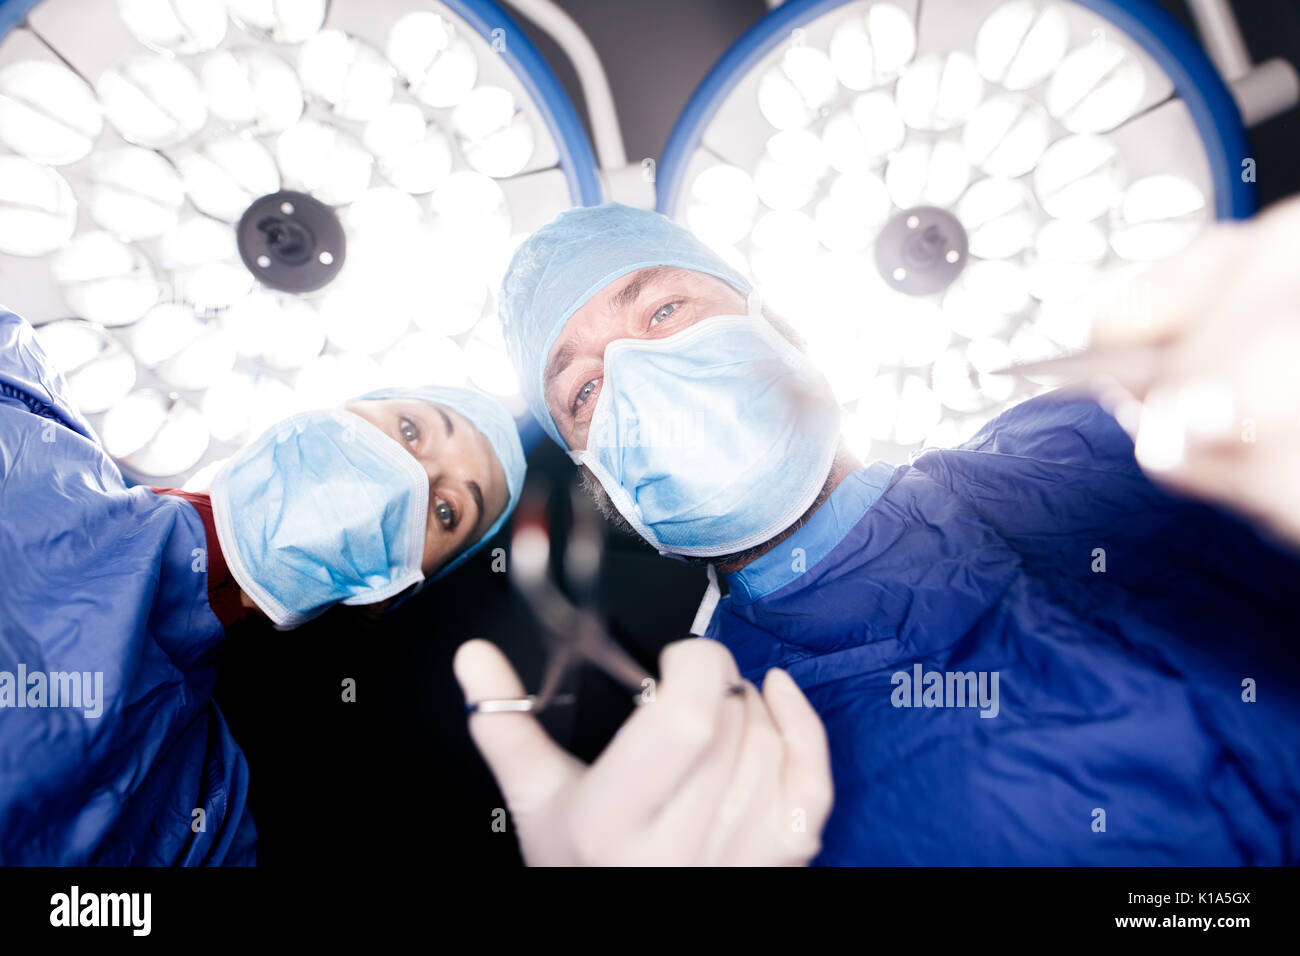 Team of surgeons operating patient under surgery lights in hospital. Doctors performing dental surgery. Stock Photo